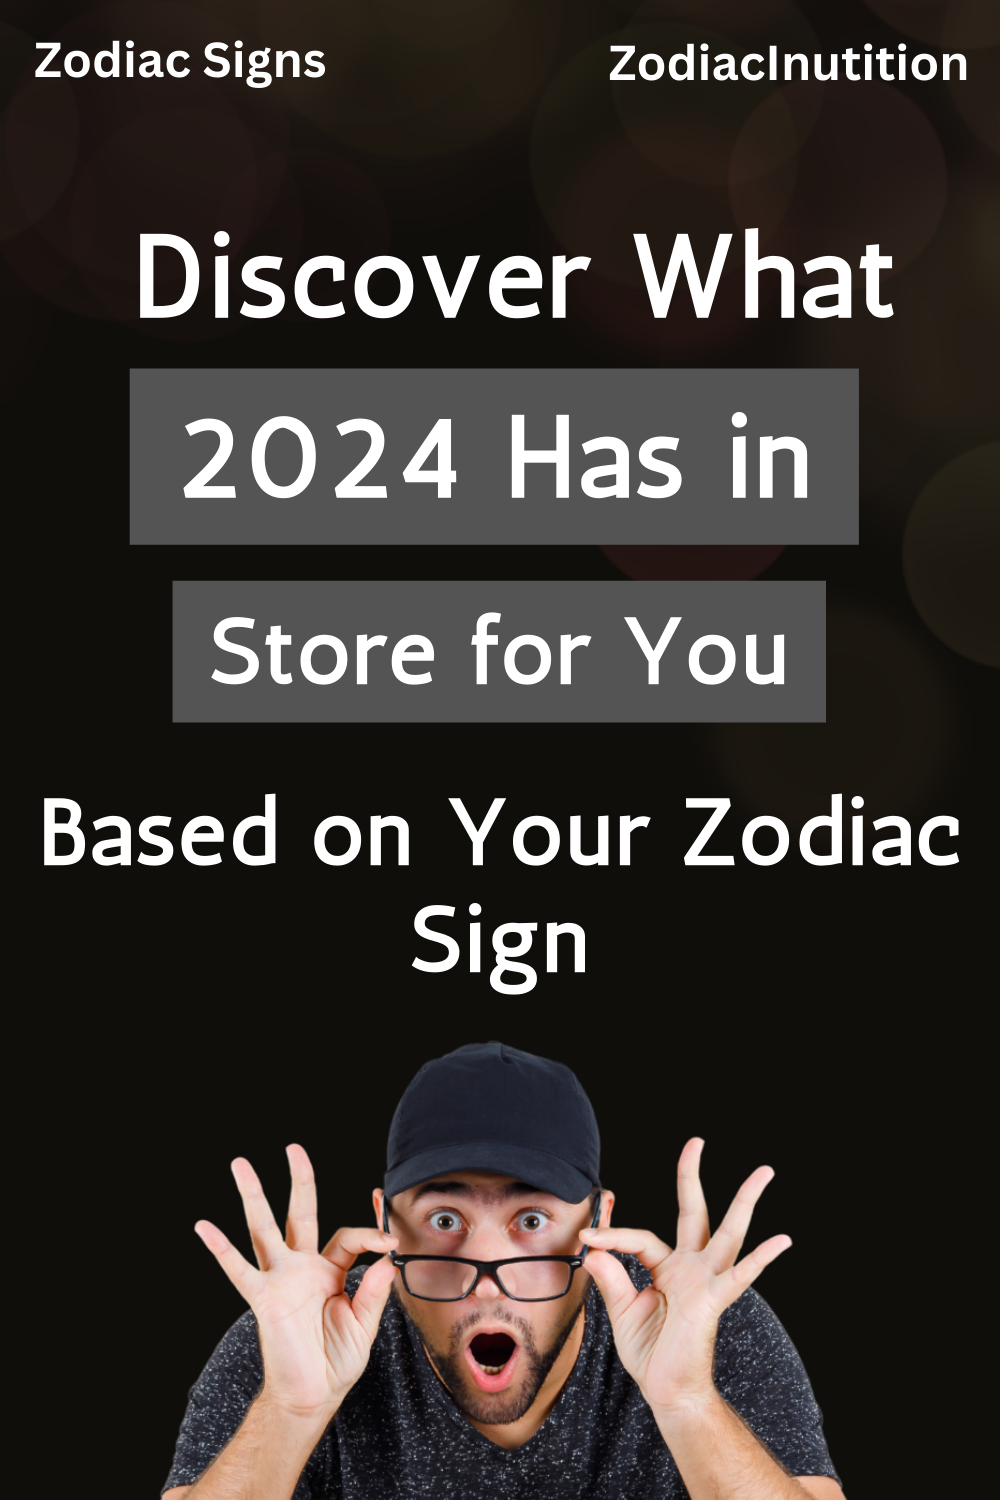 Discover What 2024 Has in Store for You Based on Your Zodiac Sign